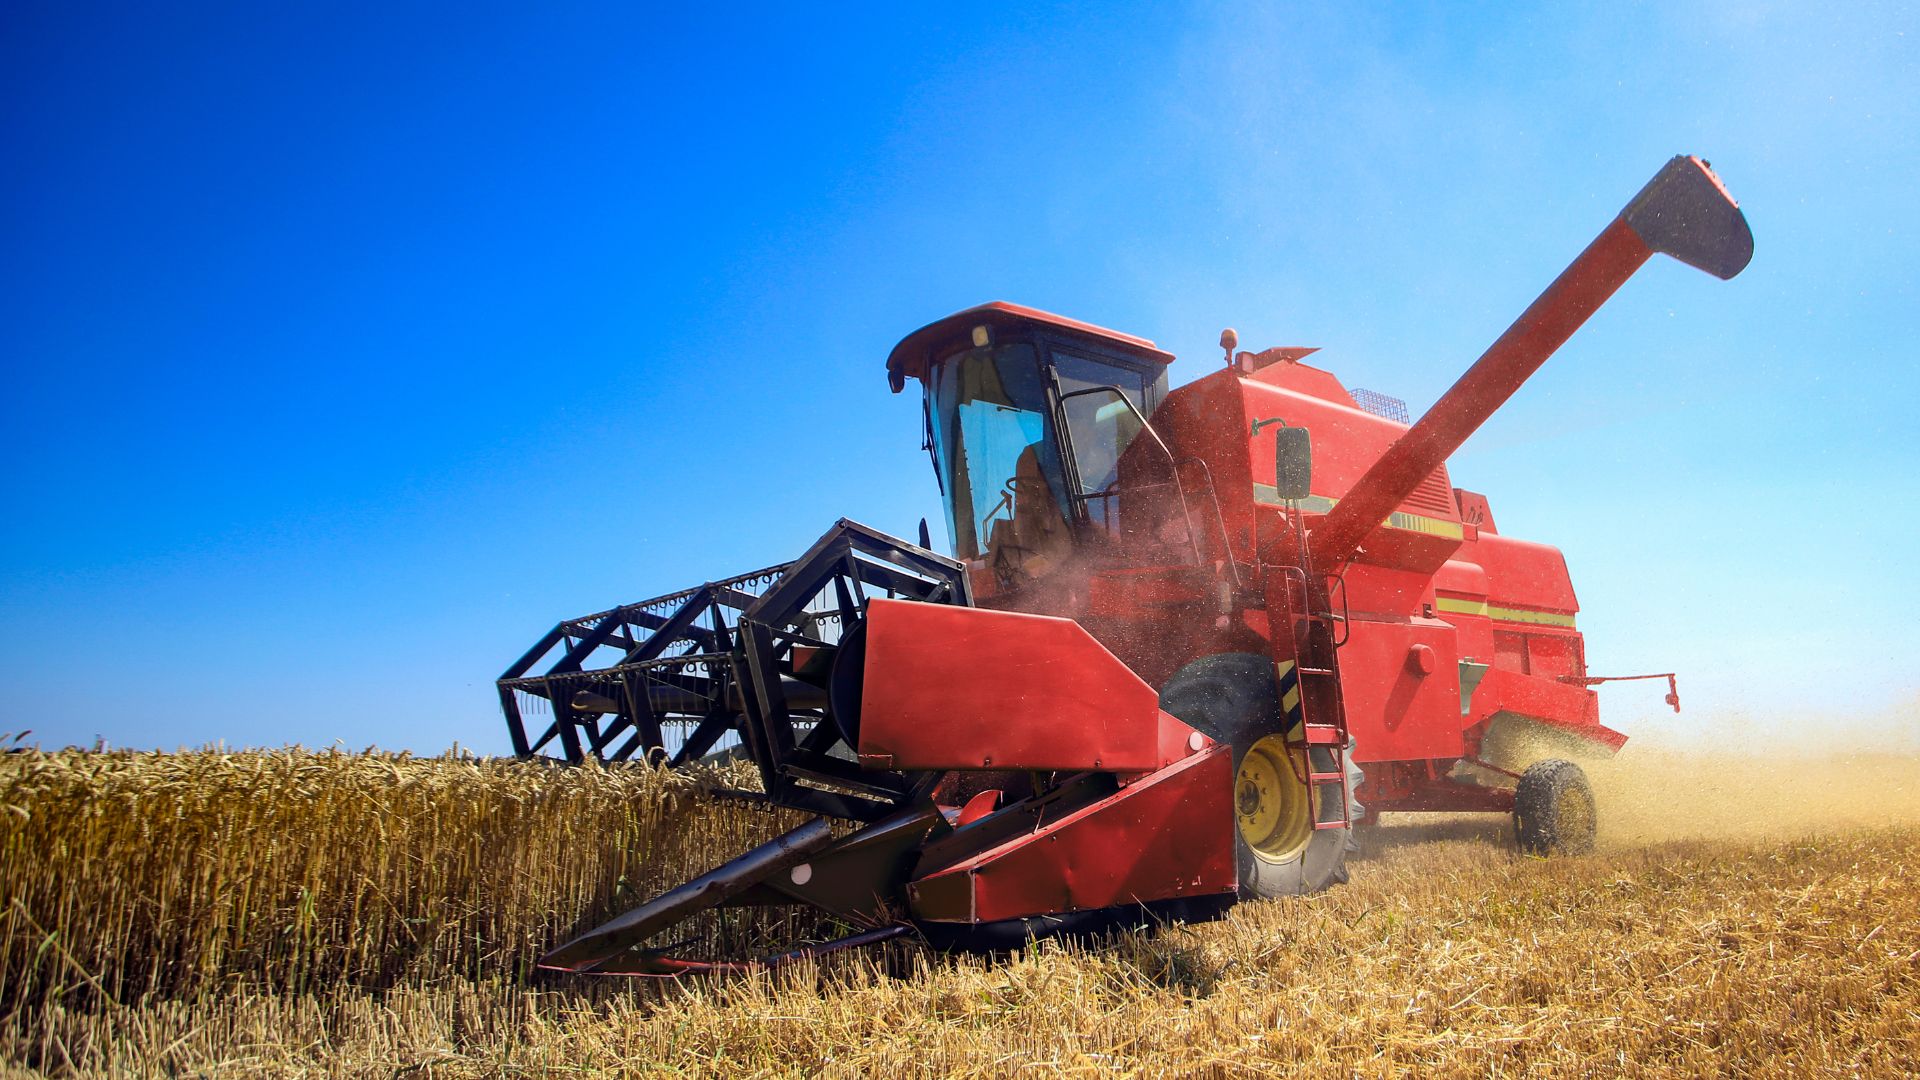 Technology empowers any farmer to trade grain globally